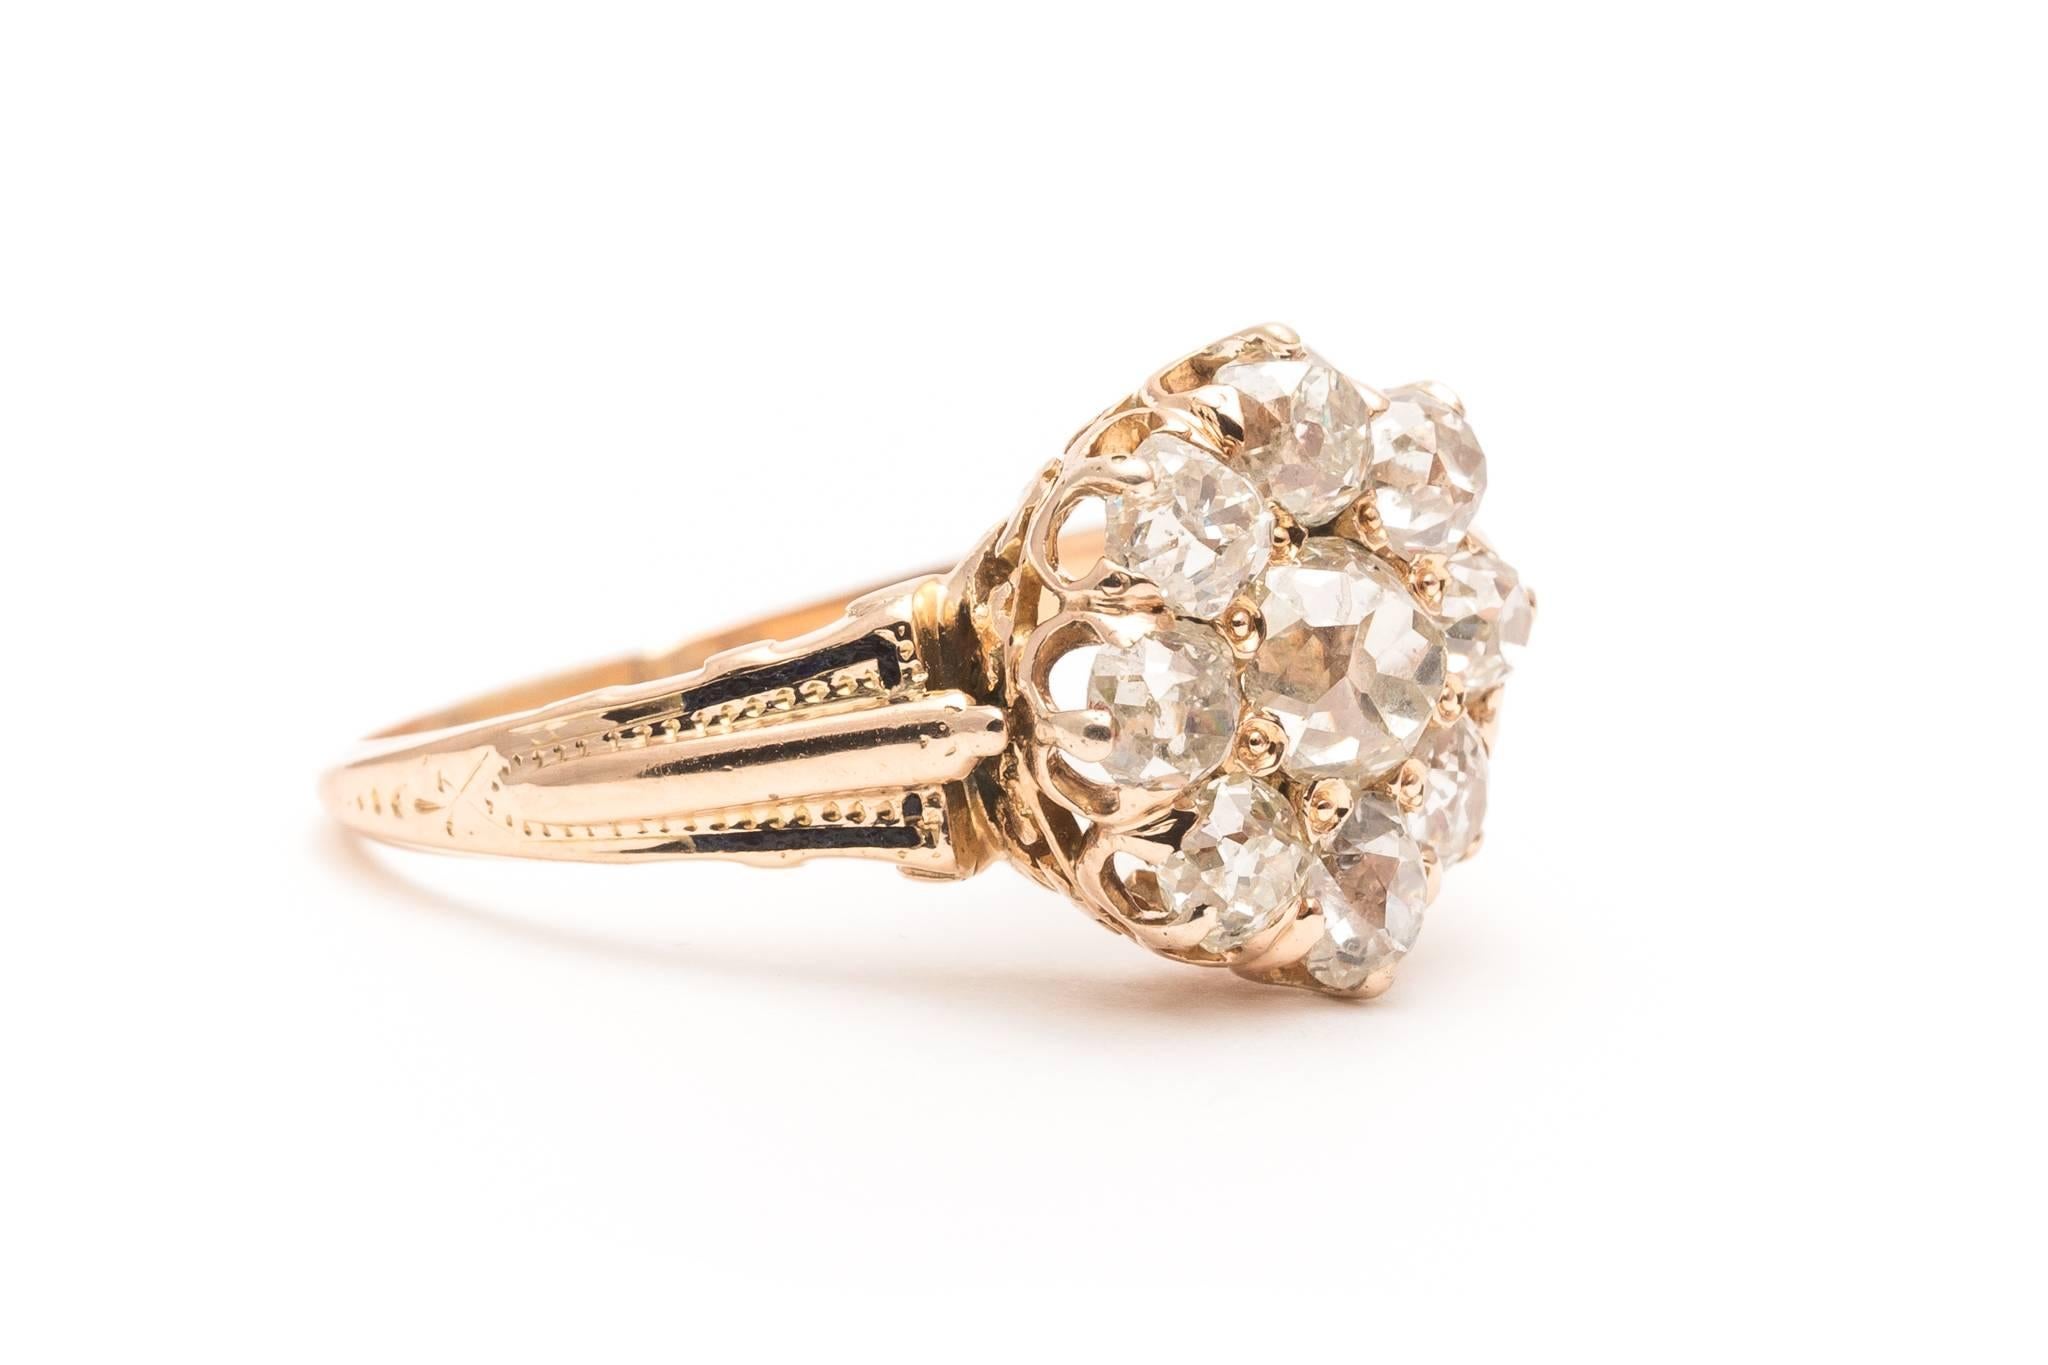 Beacon Hill Jewelers Presents:

An original victorian period diamond cluster style engagement ring in yellow gold.  Featuring a total of nine antique mine cut diamonds this ring is a great example of an original late 19th century diamond engagement